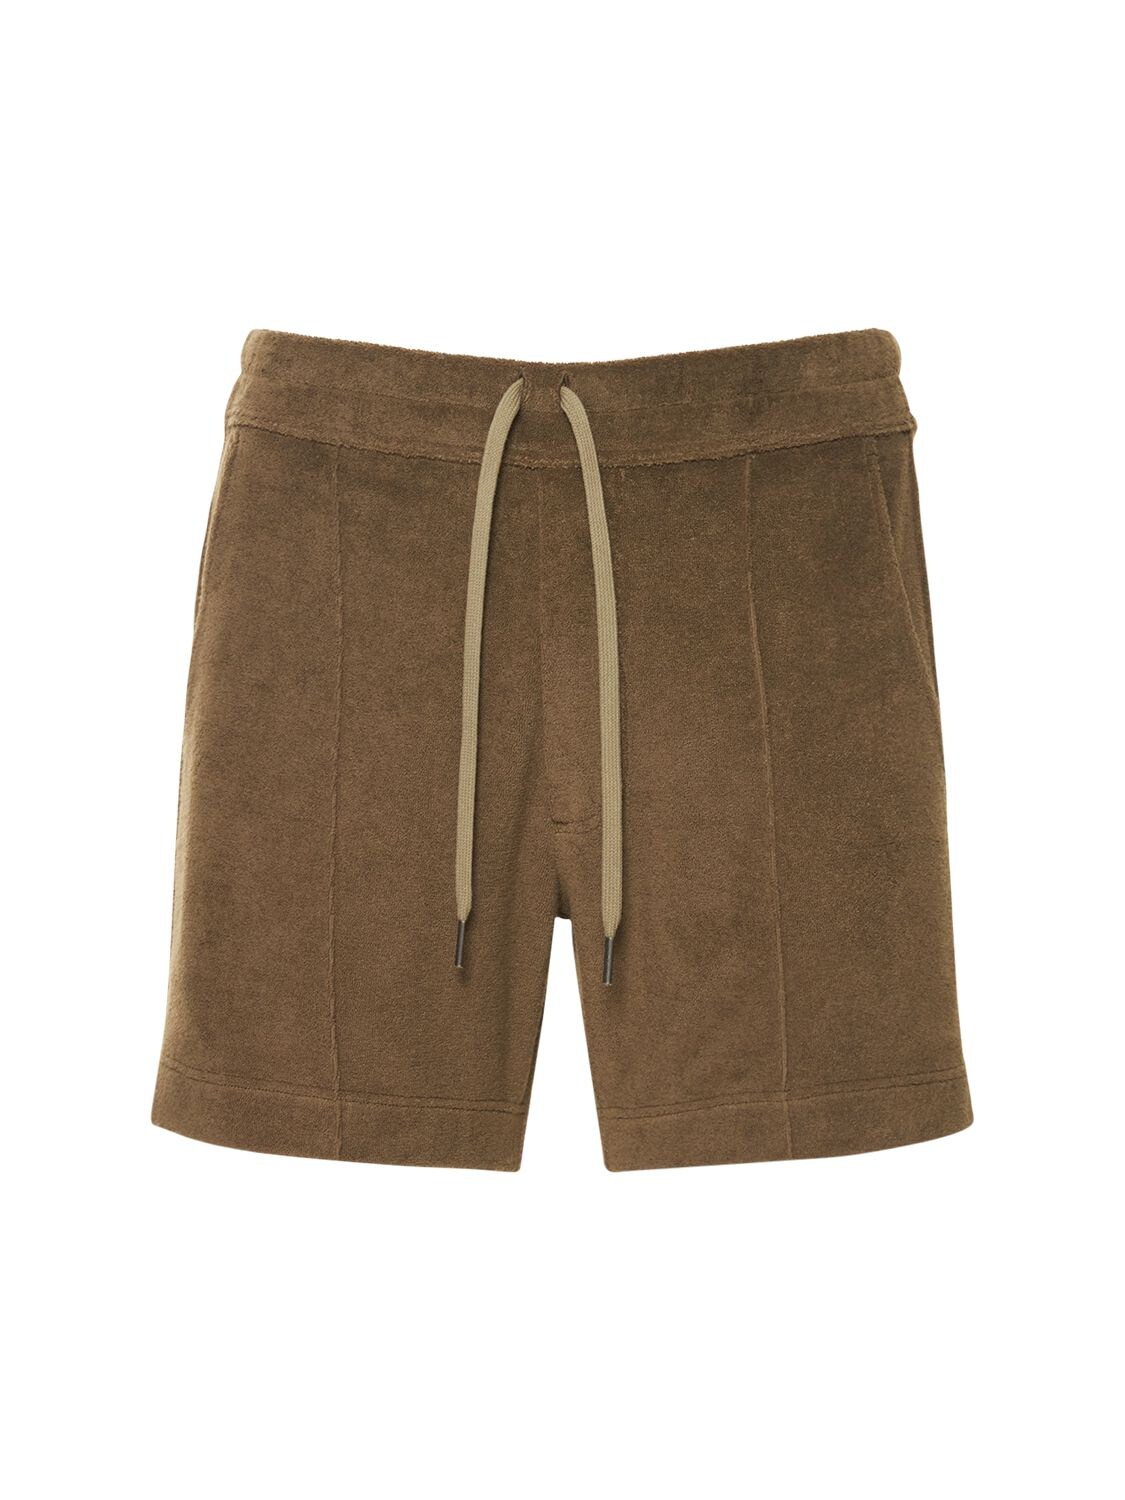 TOM FORD TOWELLING SHORTS